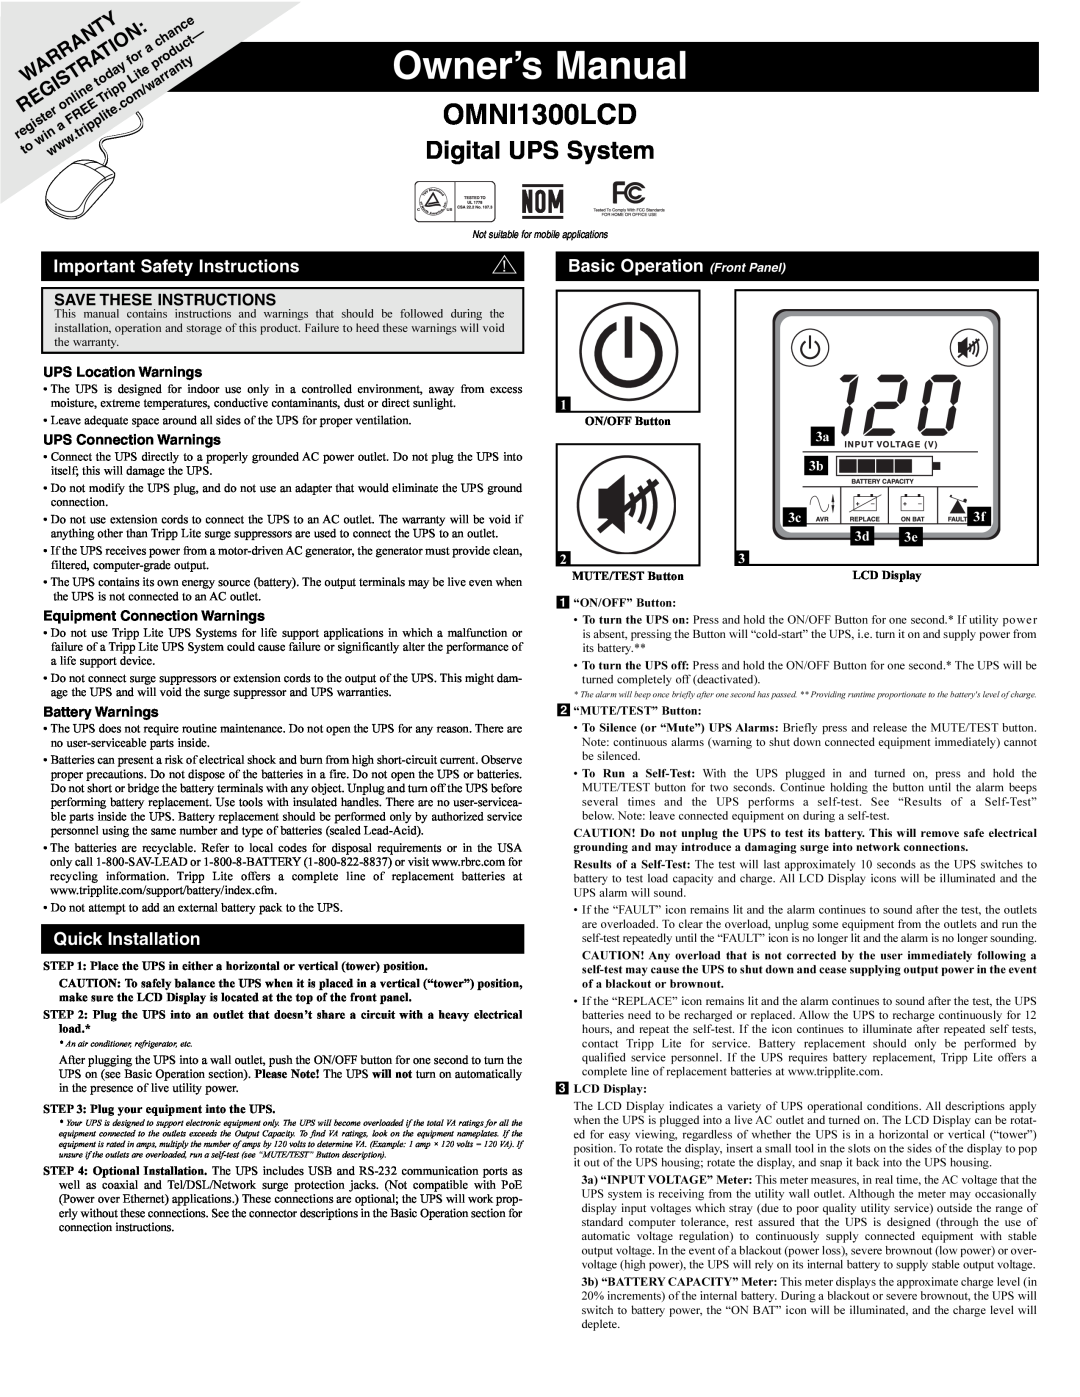 Tripp Lite OMNI1300LCD owner manual Important Safety Instructions, Basic Operation Front Panel, Quick Installation 